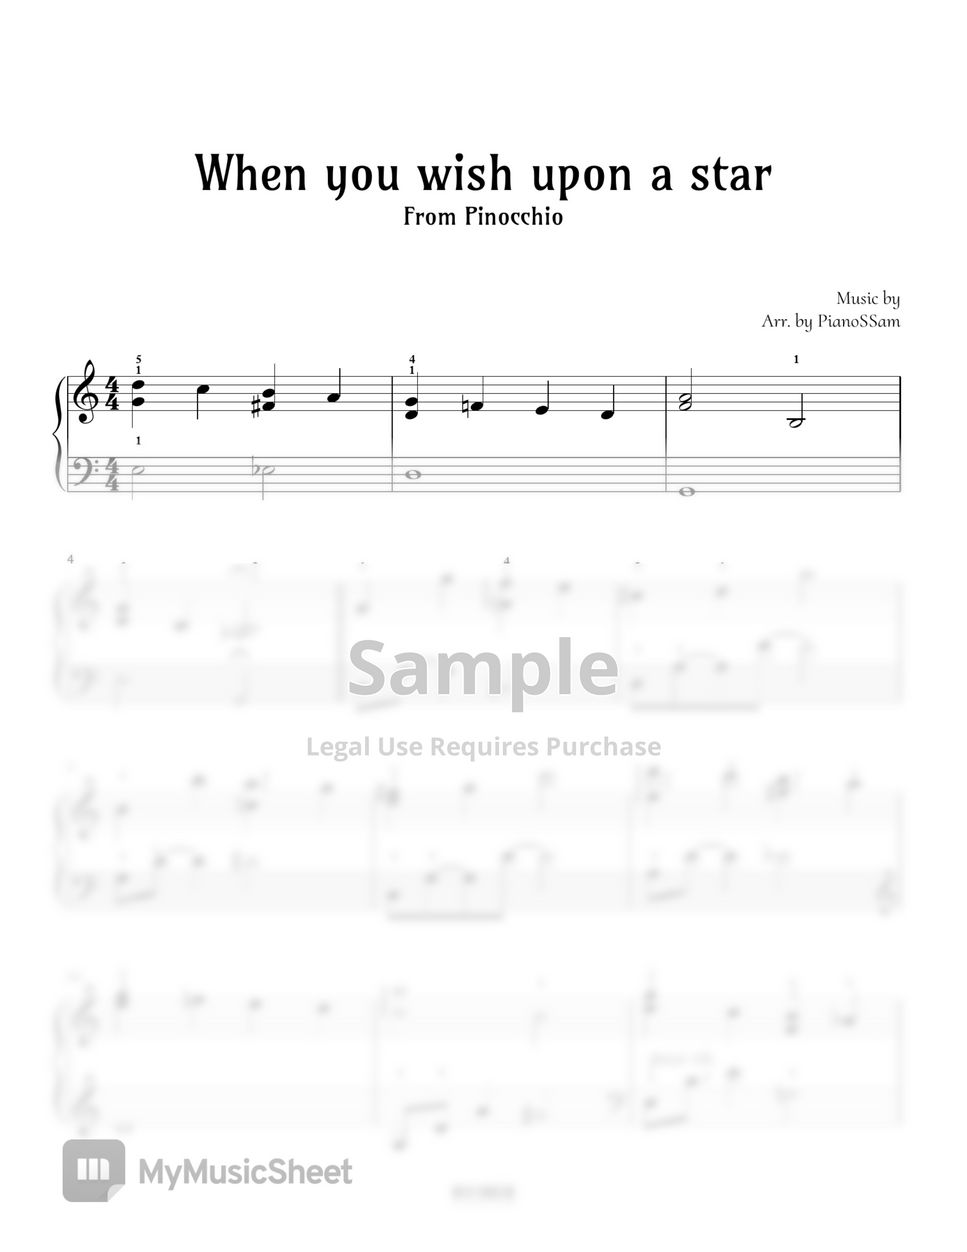 Leigh Harline - When you wish upon a star (Pinocchio) by PianoSSam